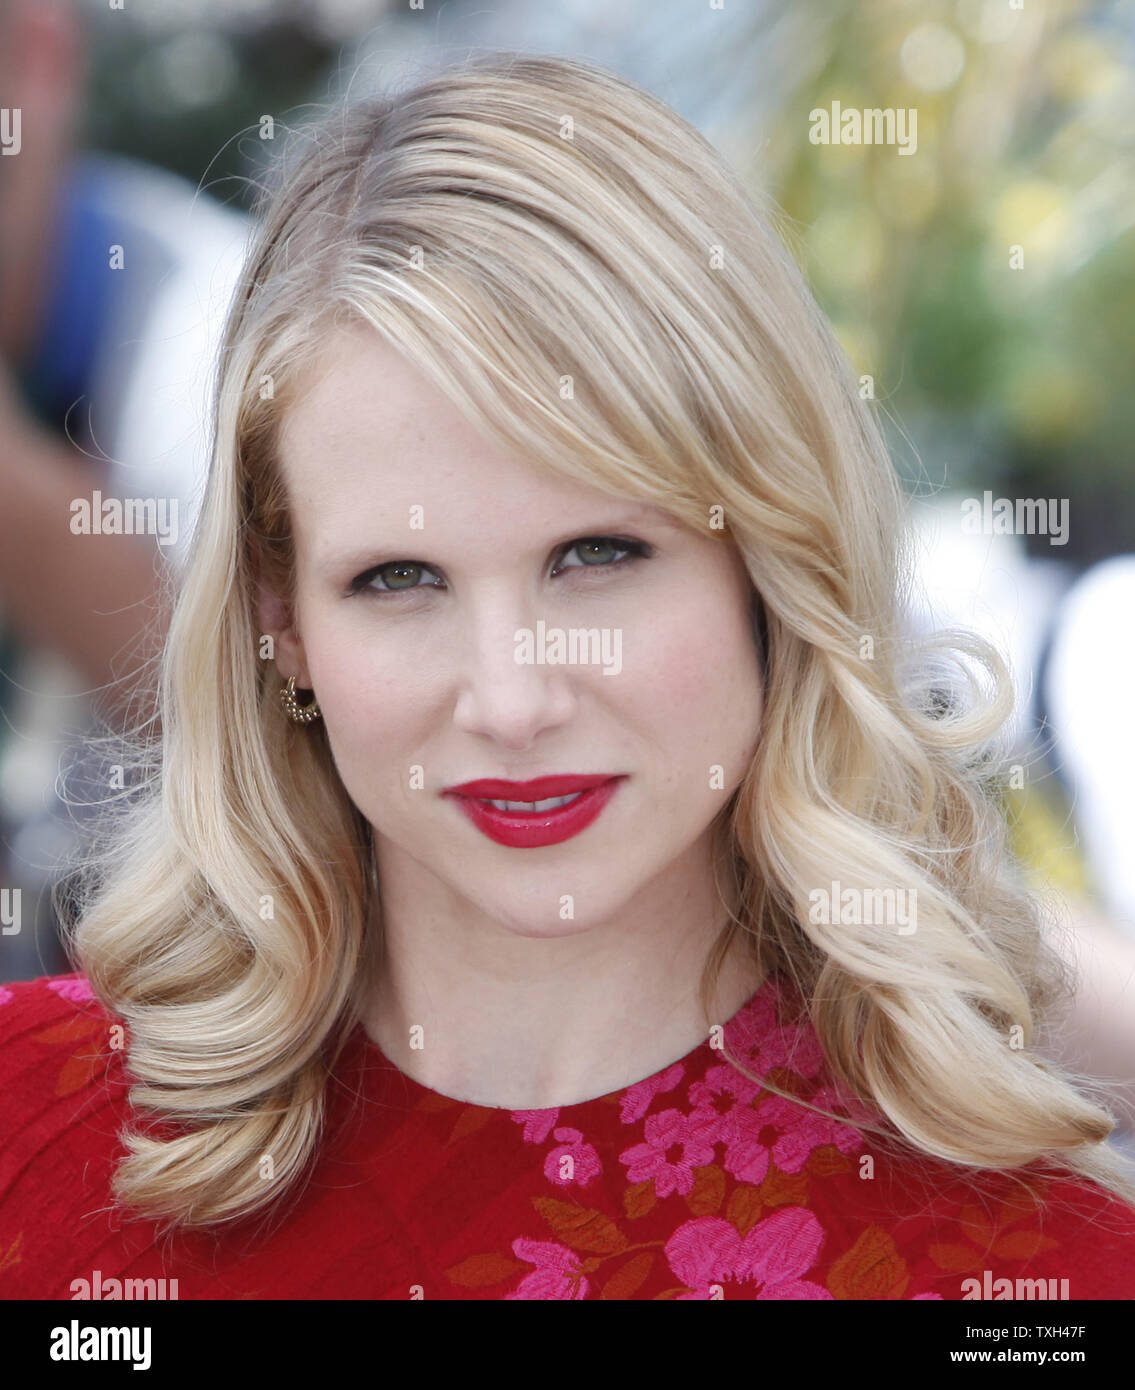 Lucy Punch arrives at a photocall for the film 'You Will Meet A Tall Dark Stranger' at the 63rd annual Cannes International Film Festival in Cannes, France on May 15, 2010.   UPI/David Silpa Stock Photo